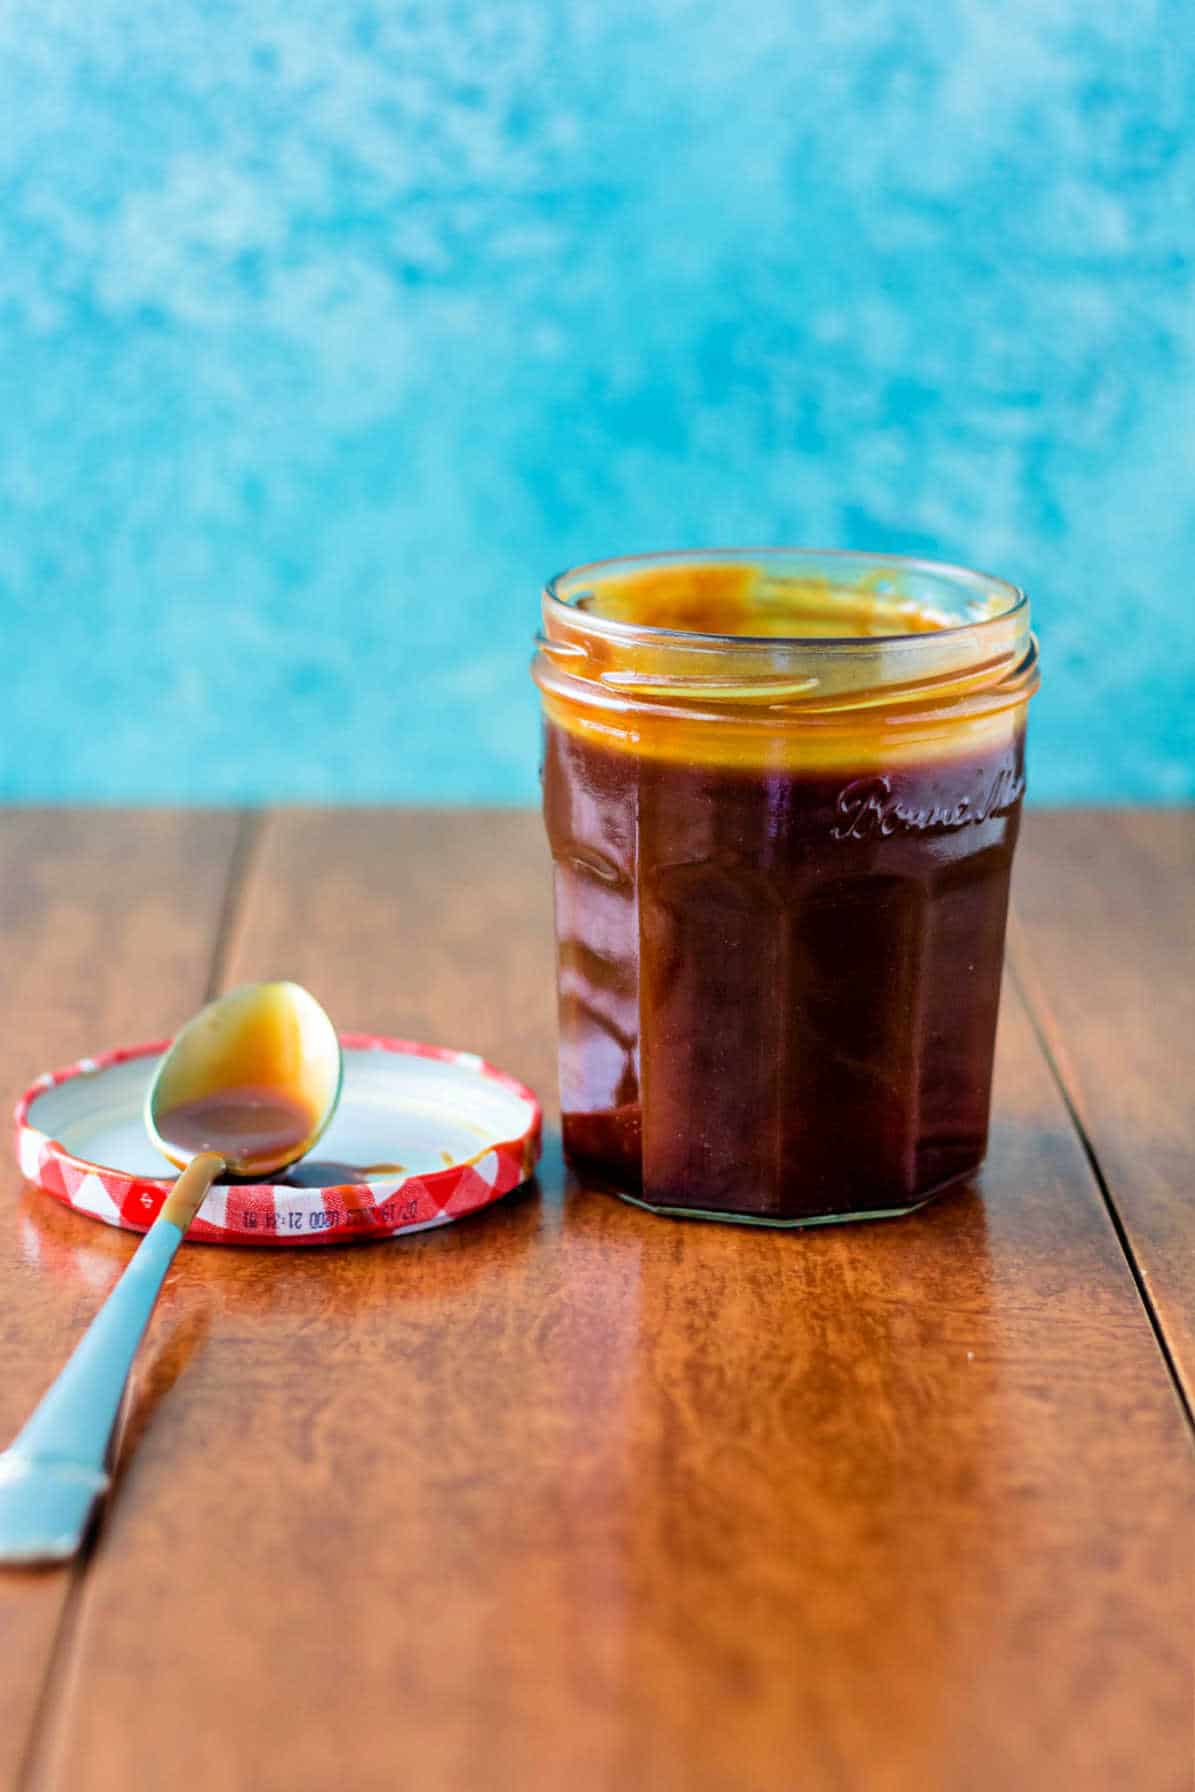 A nearly-full jar of caramel sauce. The lid is off and placed to the left of the jar. A spoon rests on the lid.